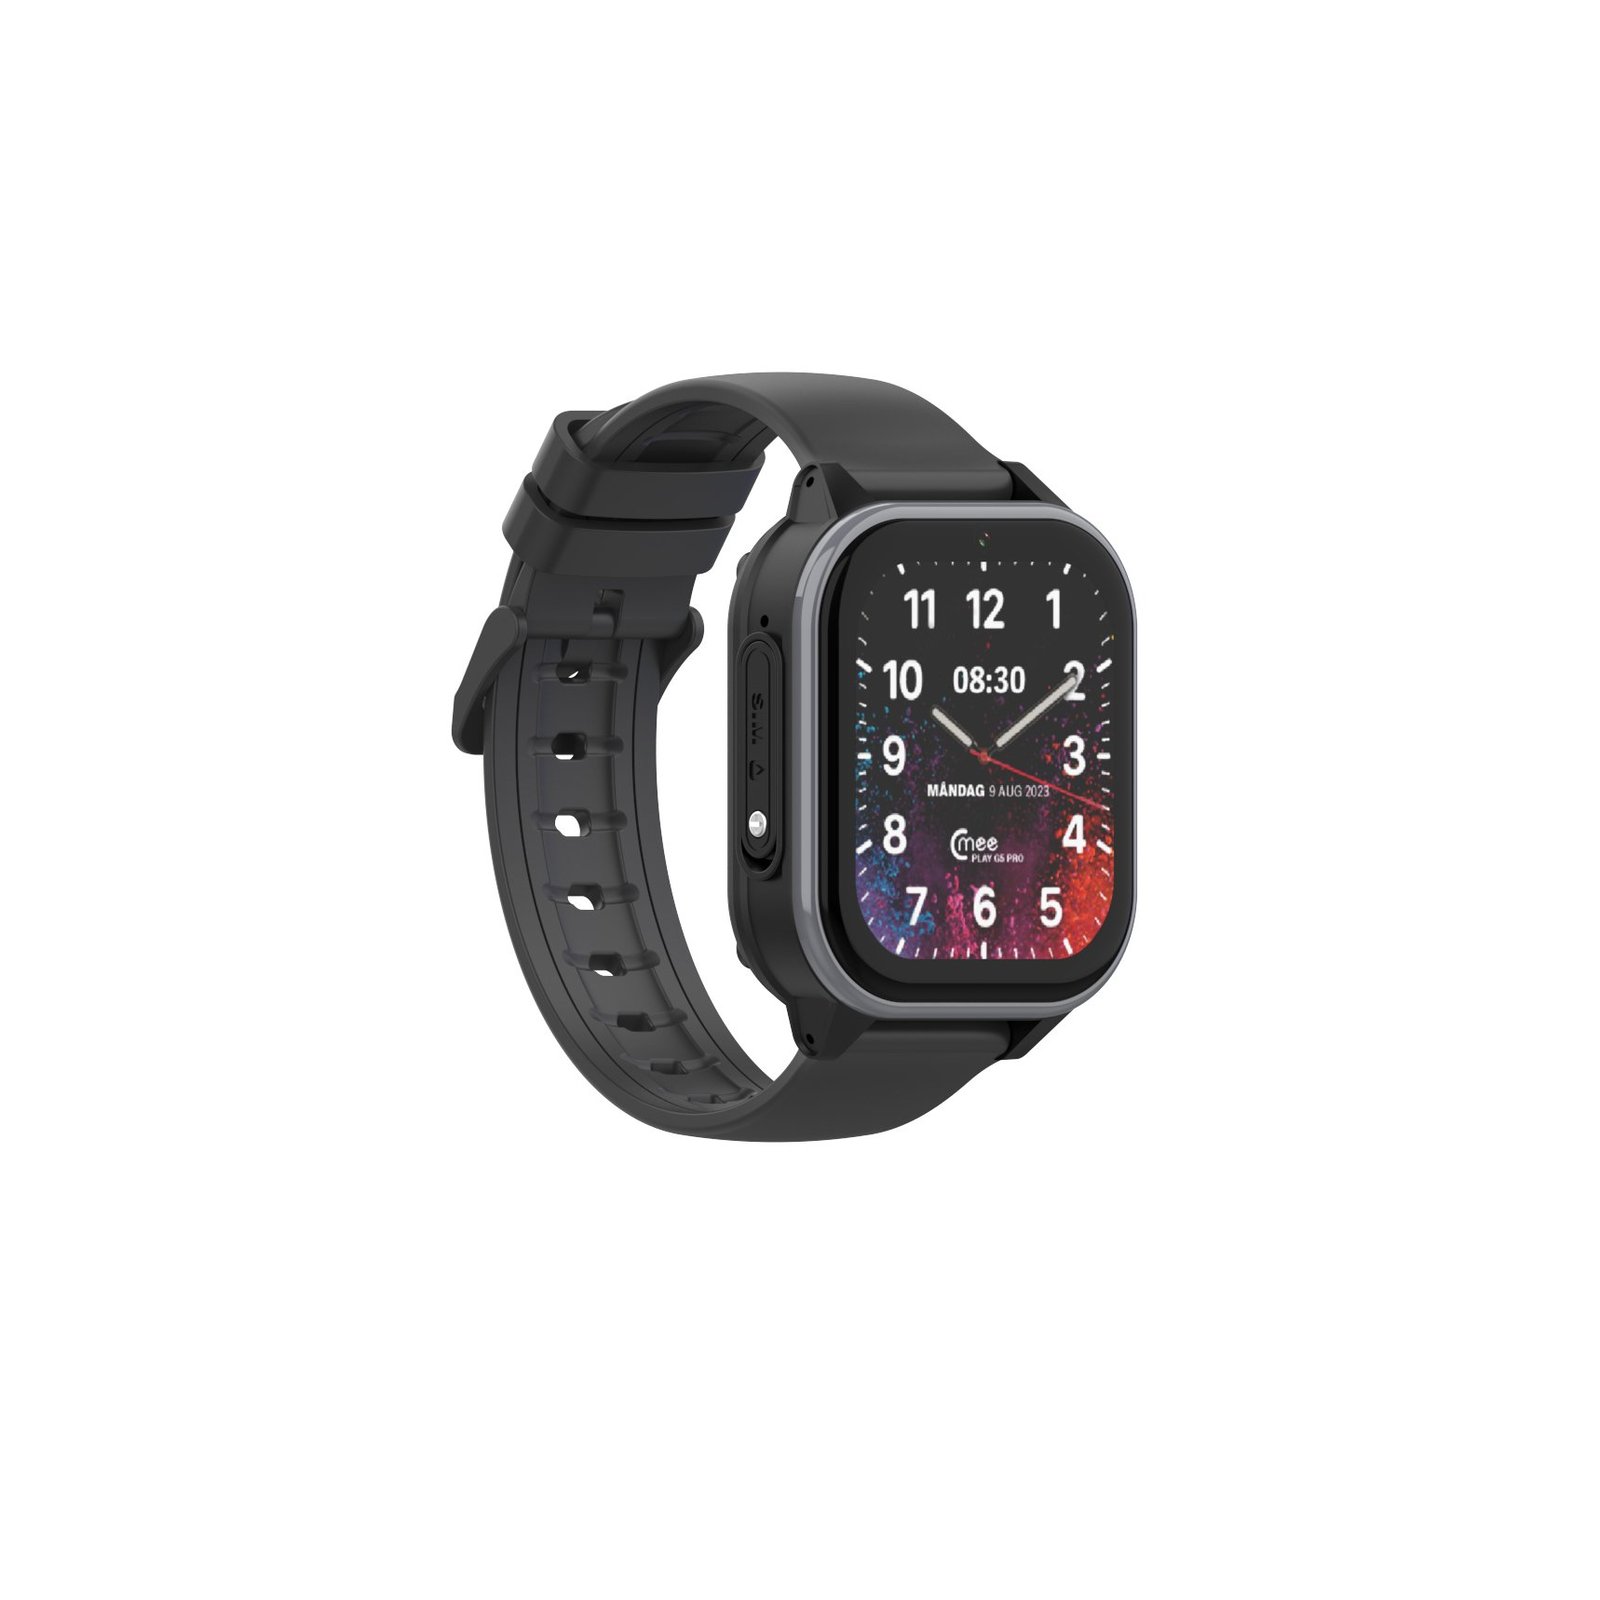 CMEE PLAY Mobile Watch G5 Pro Black